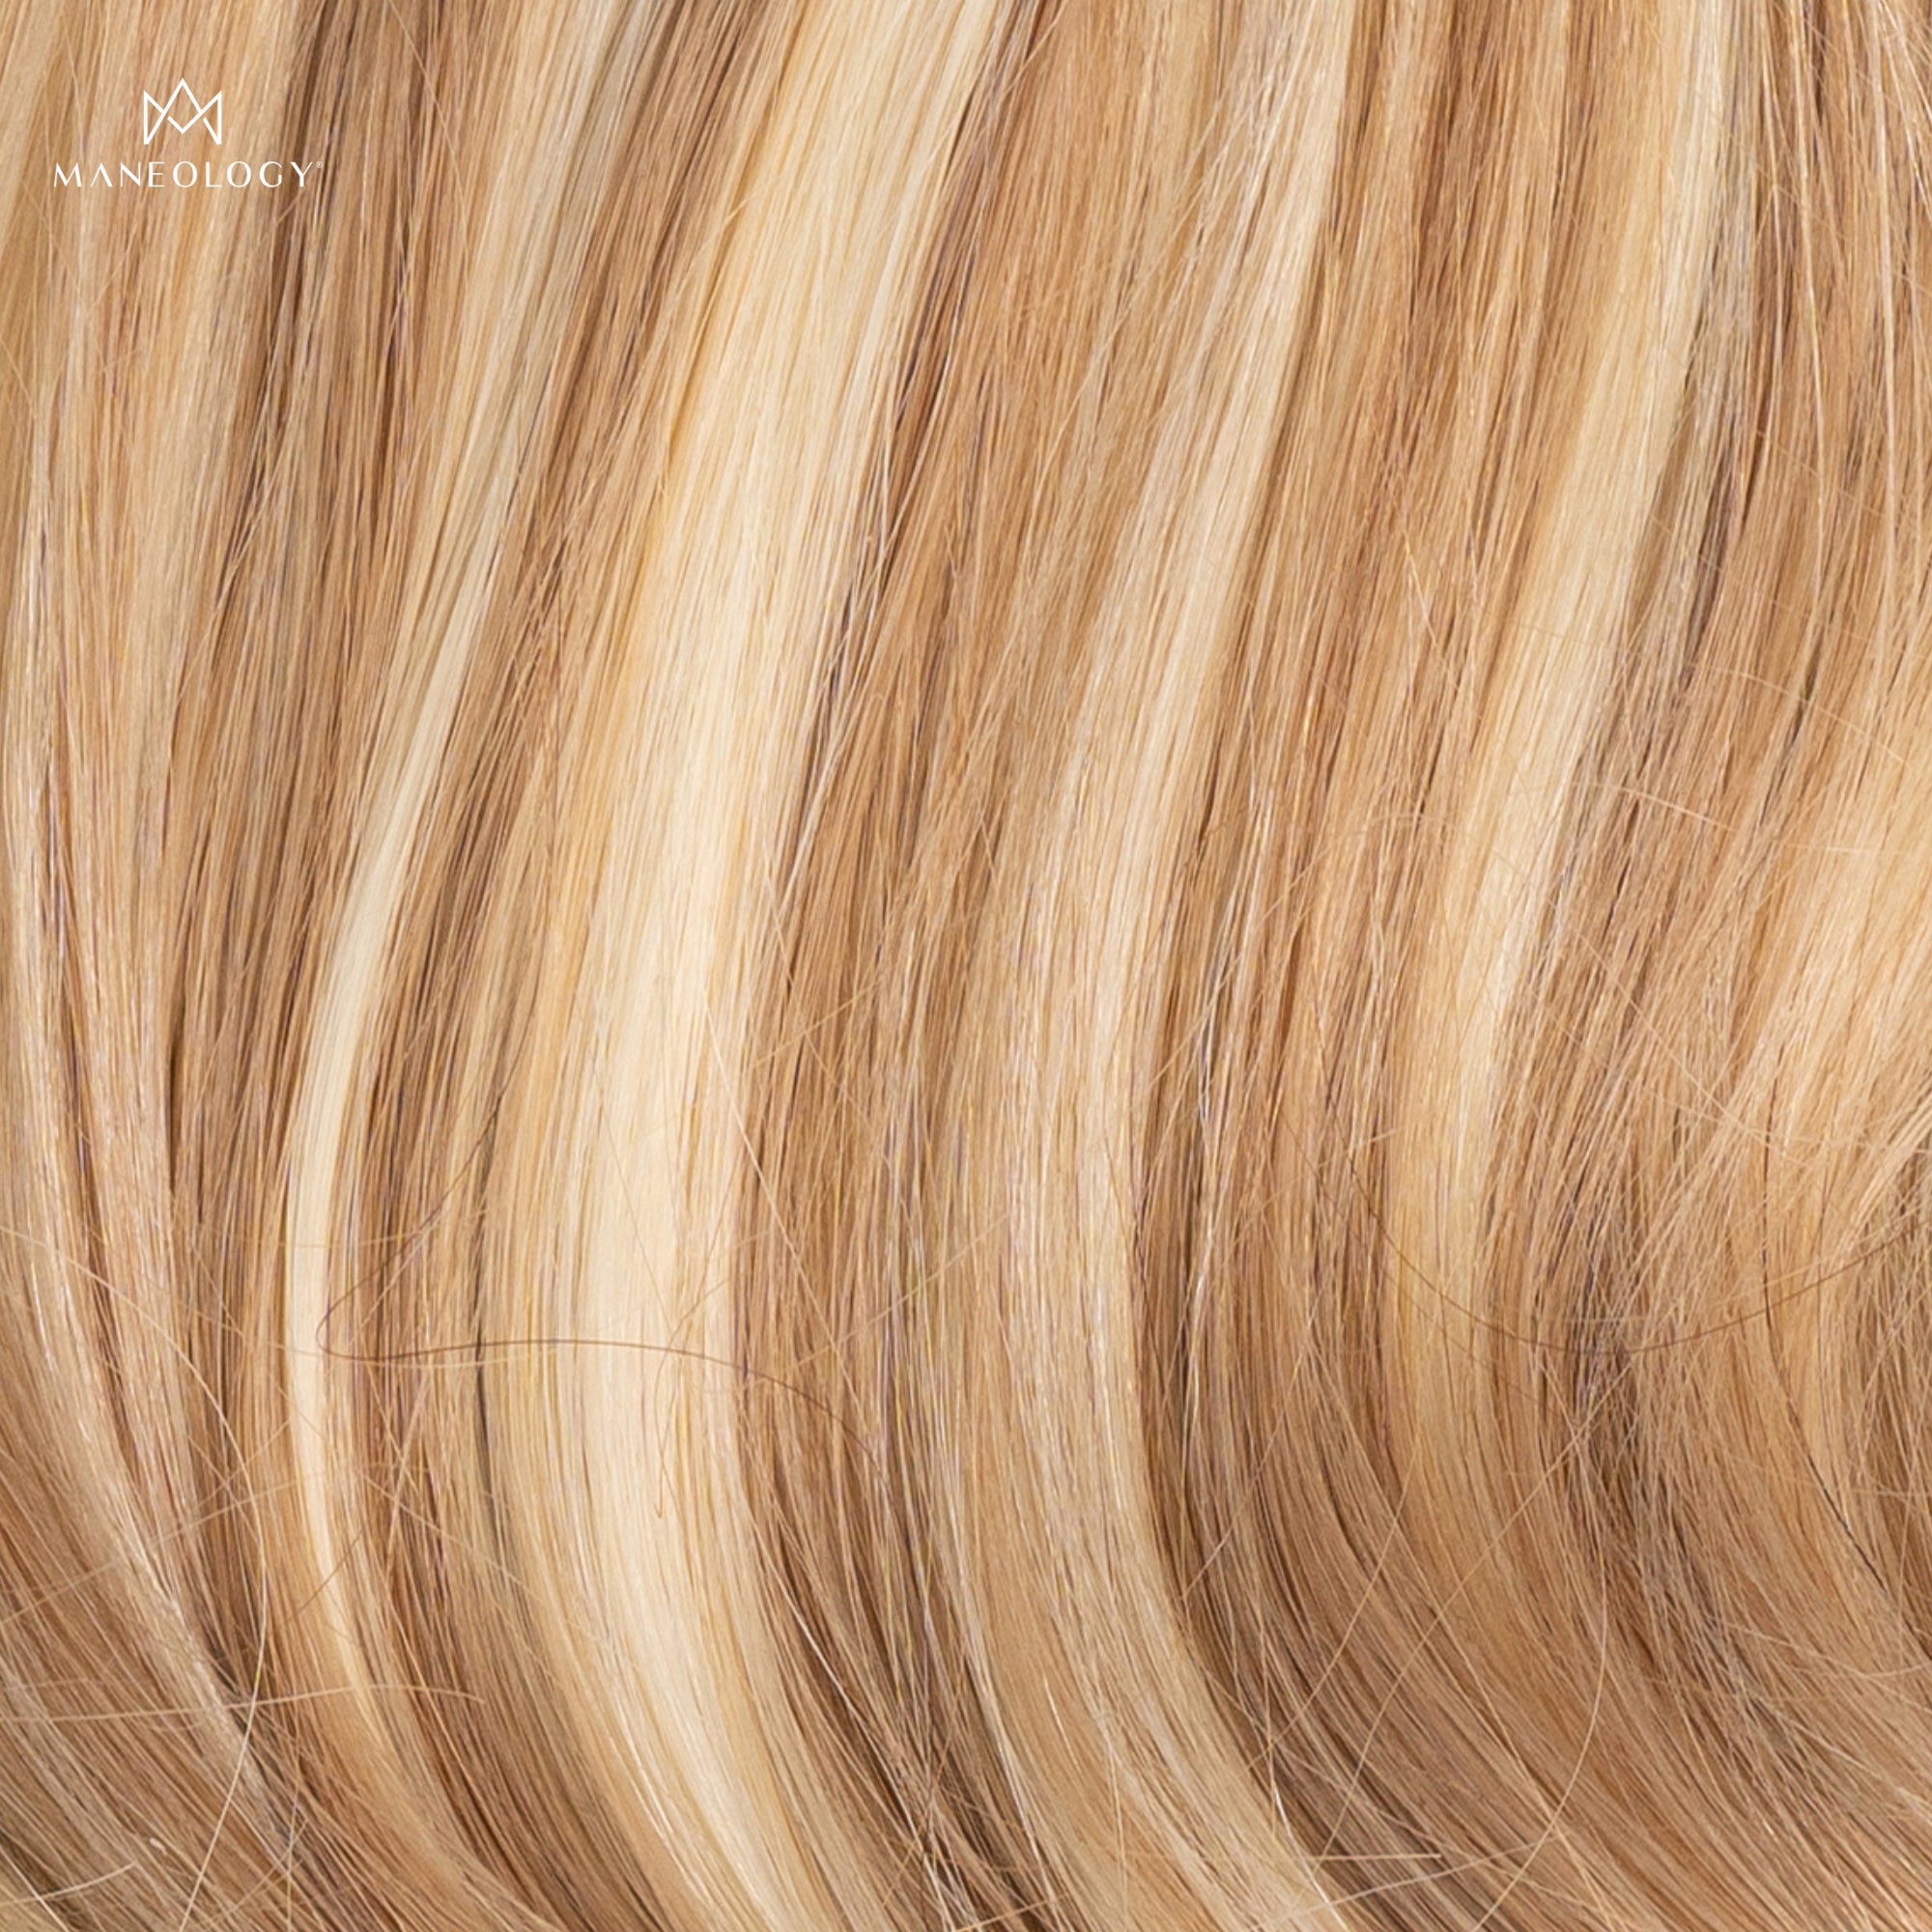 Seamless Tape in Hair Extensions P10 24 163 - Maneology Hair Extensions